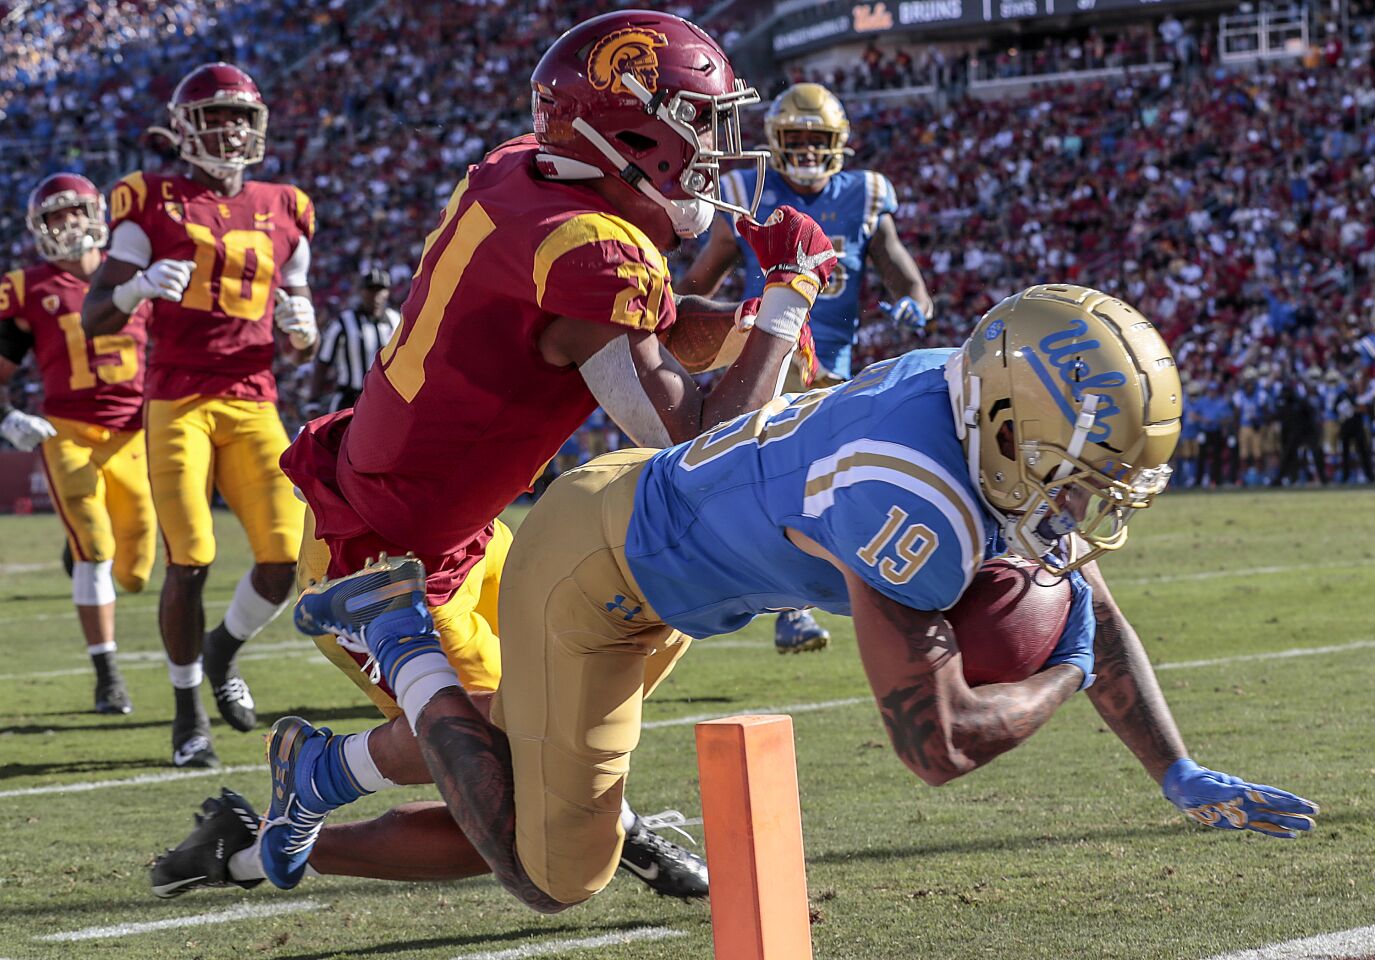 UCLA running back Kazmeir Allen (19) falls short of a touchdown as he is tackled by USC safety Isaiah Pola-Mao (21) during first half action at the Coliseum on Saturday.